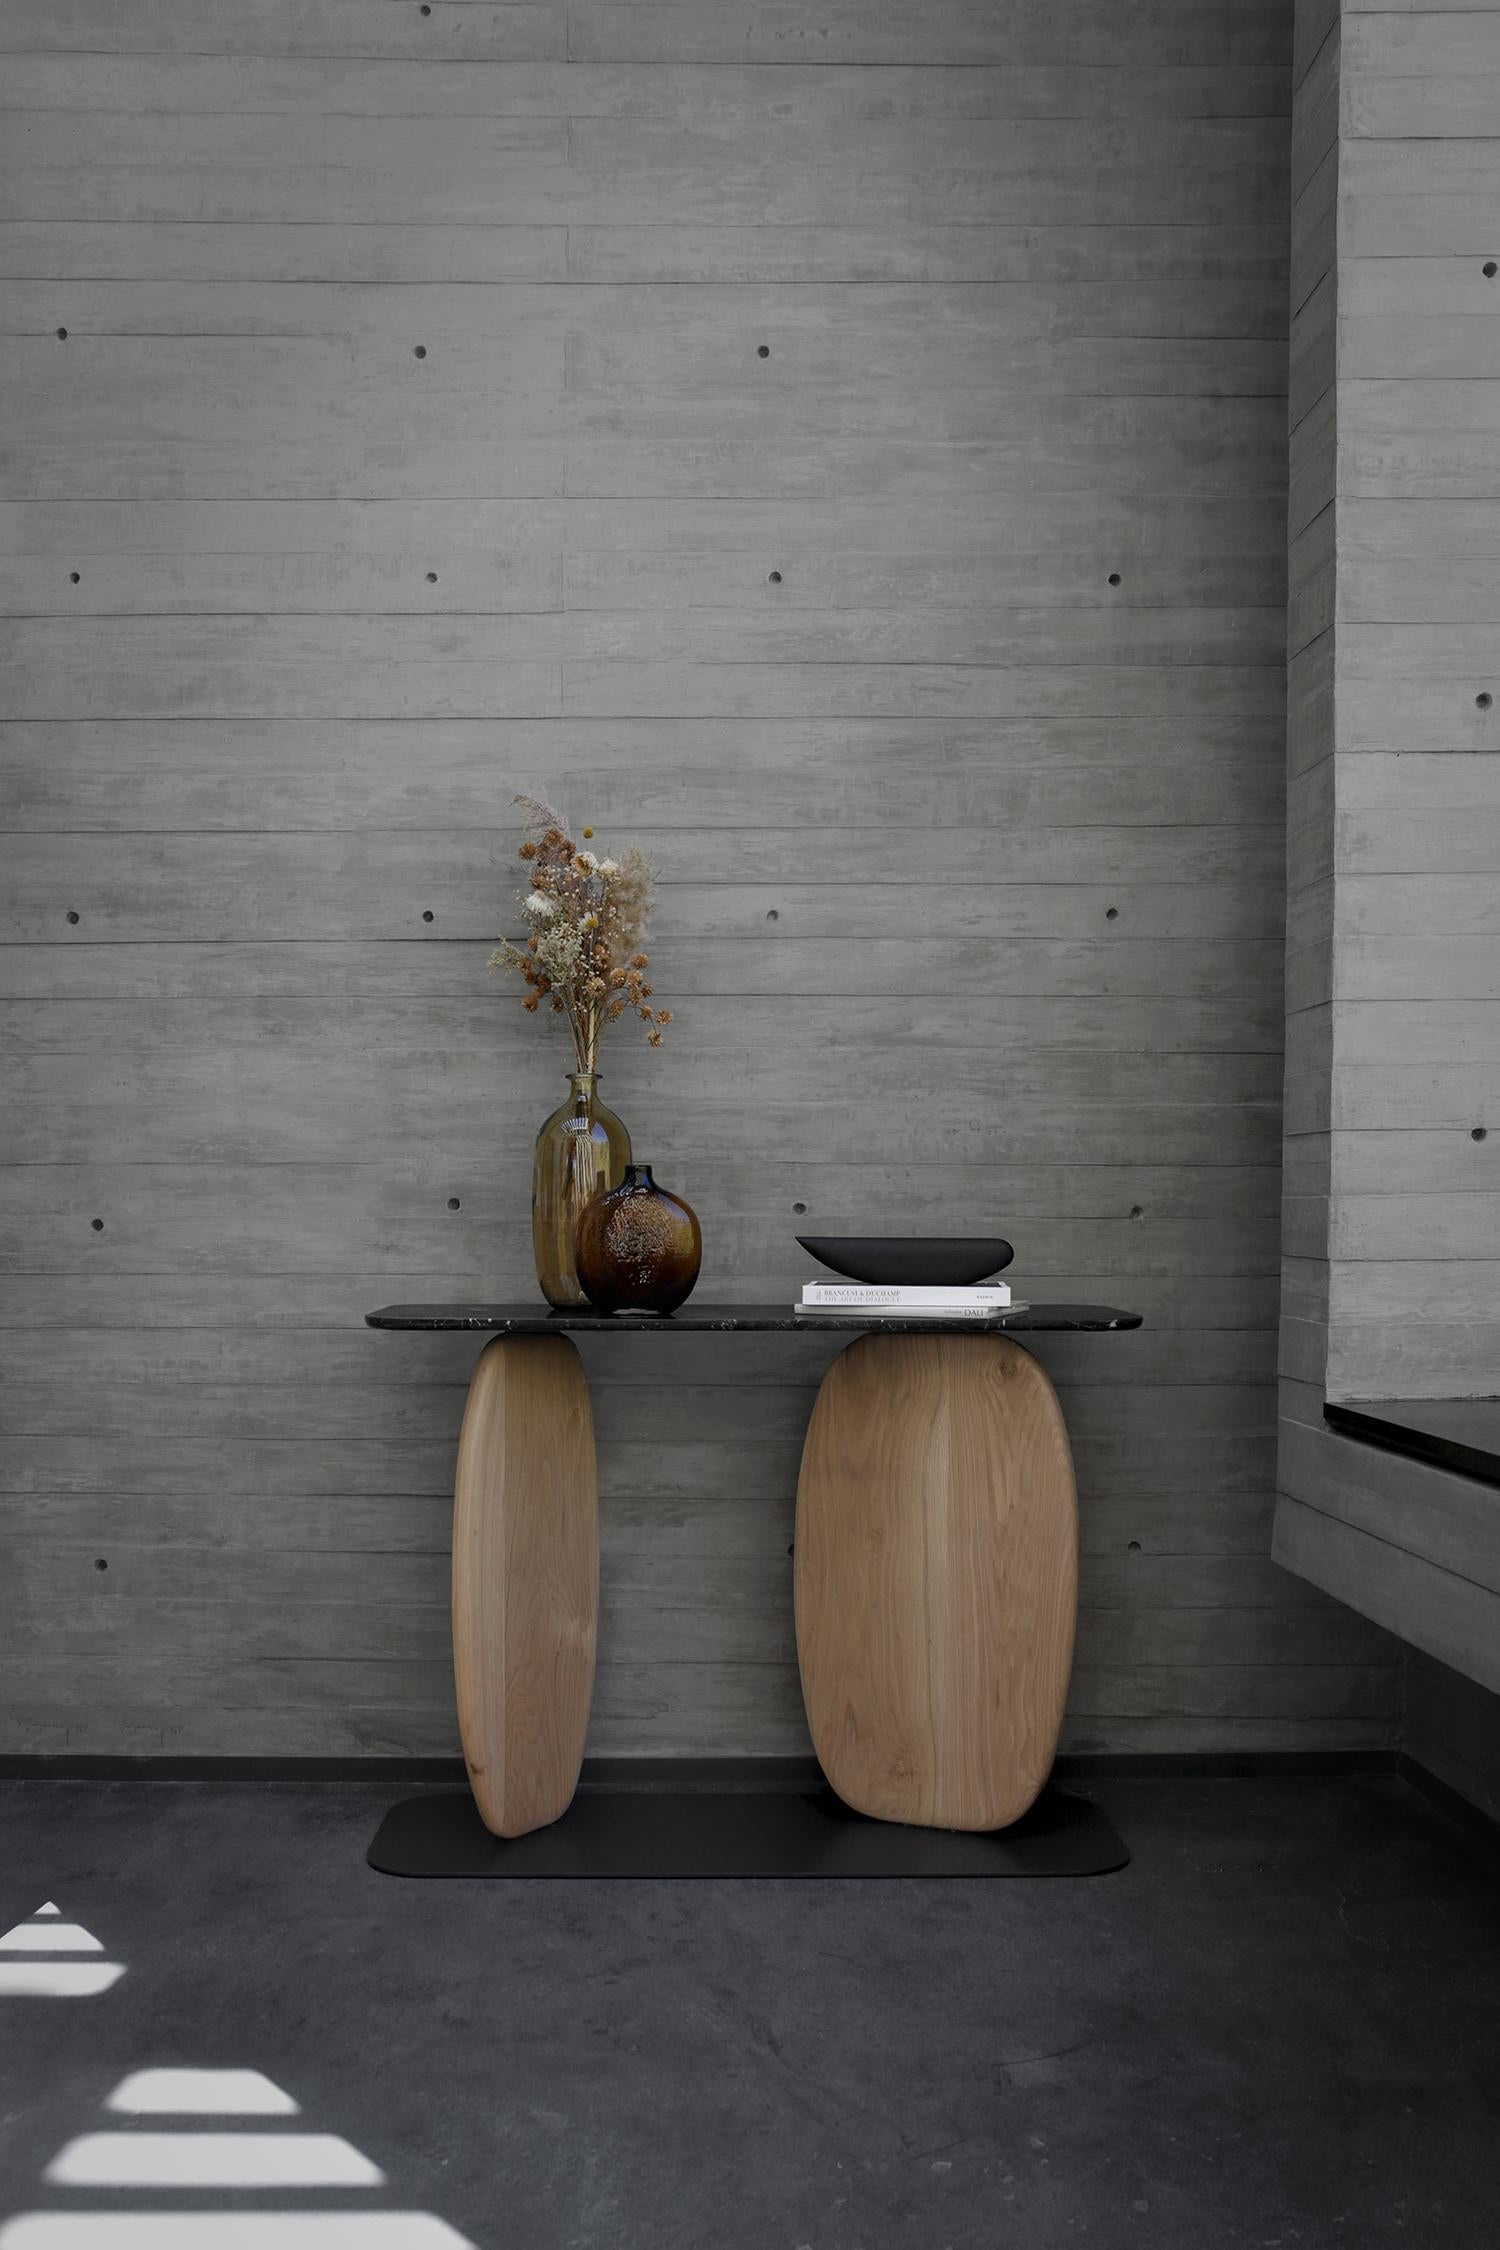 The Septima console is part of Noviembre collection, whic offers a compelling range of furniture, inviting exploration of form, function, and the serene lines that define each piece. Inspired by Constantin Brancusi's artistic philosophy, the